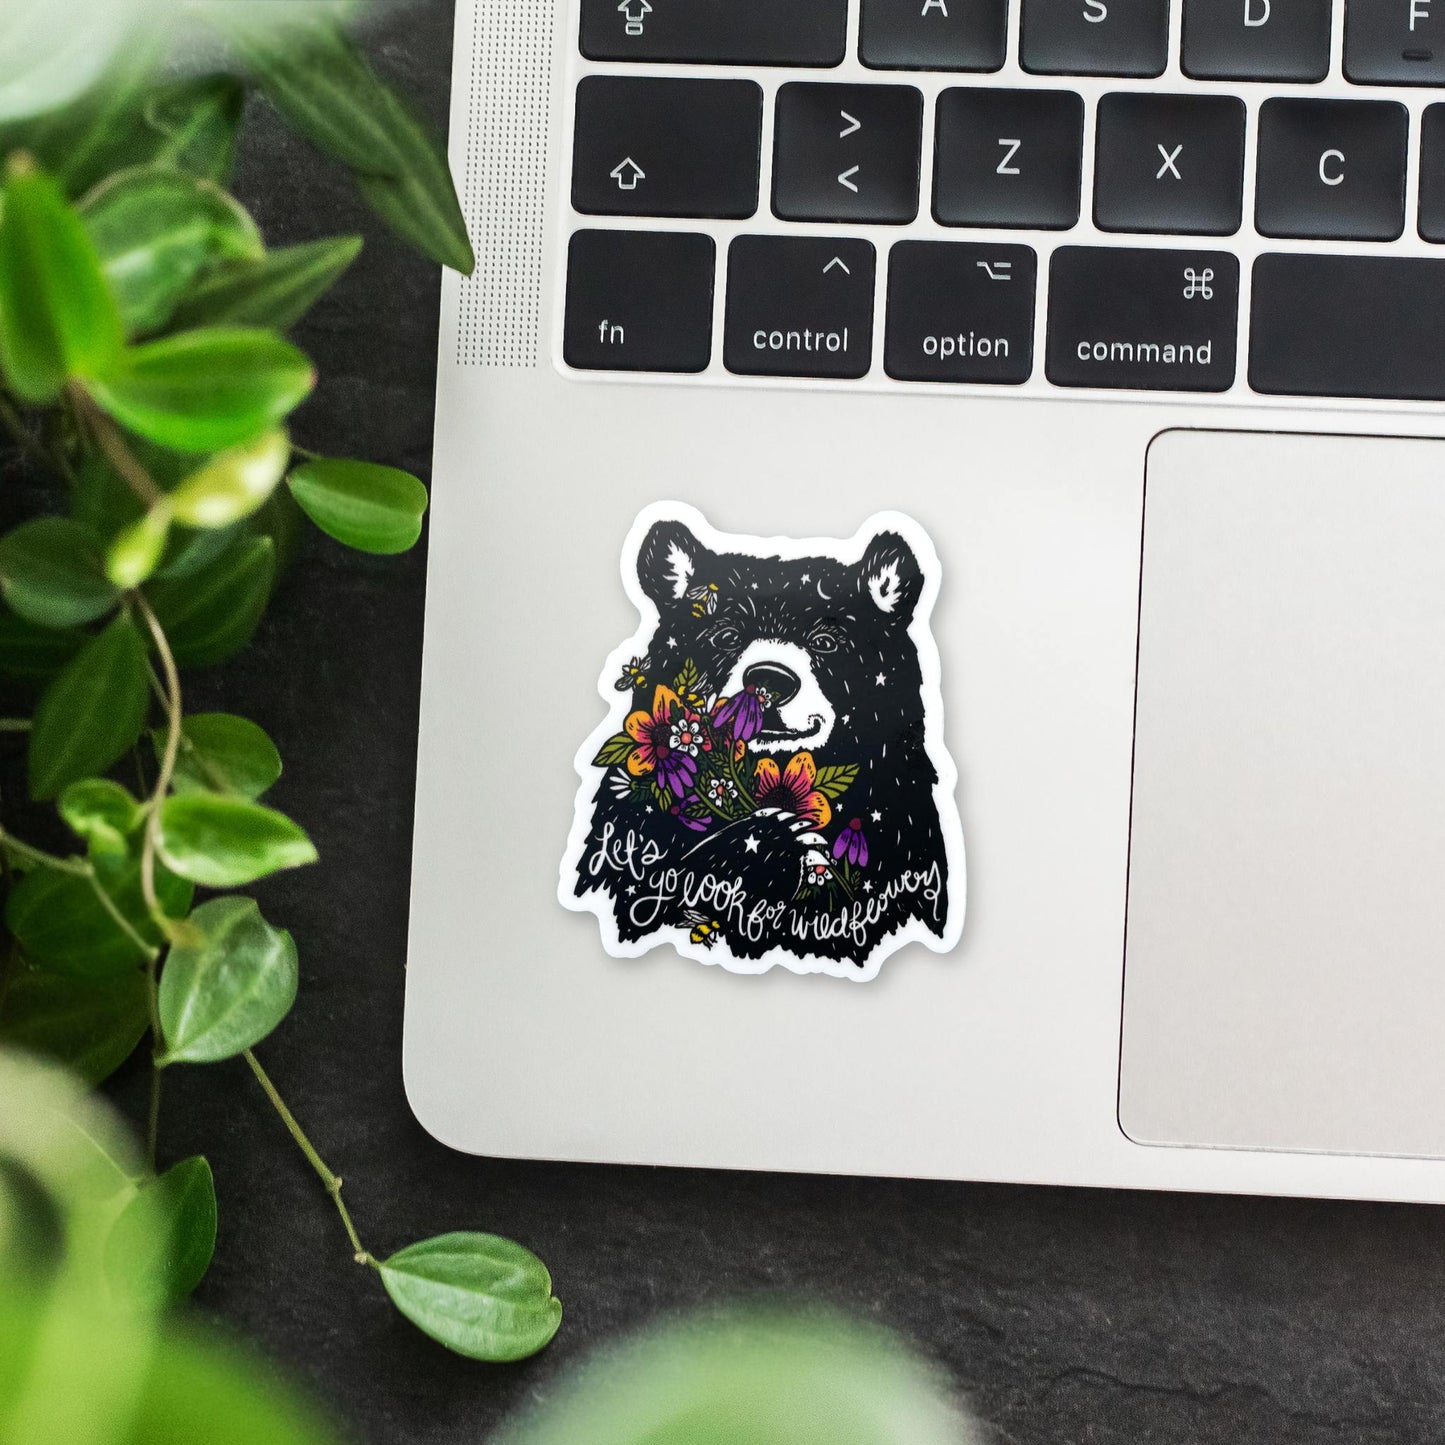 Let's Go Look for Wildflowers Bear Sticker